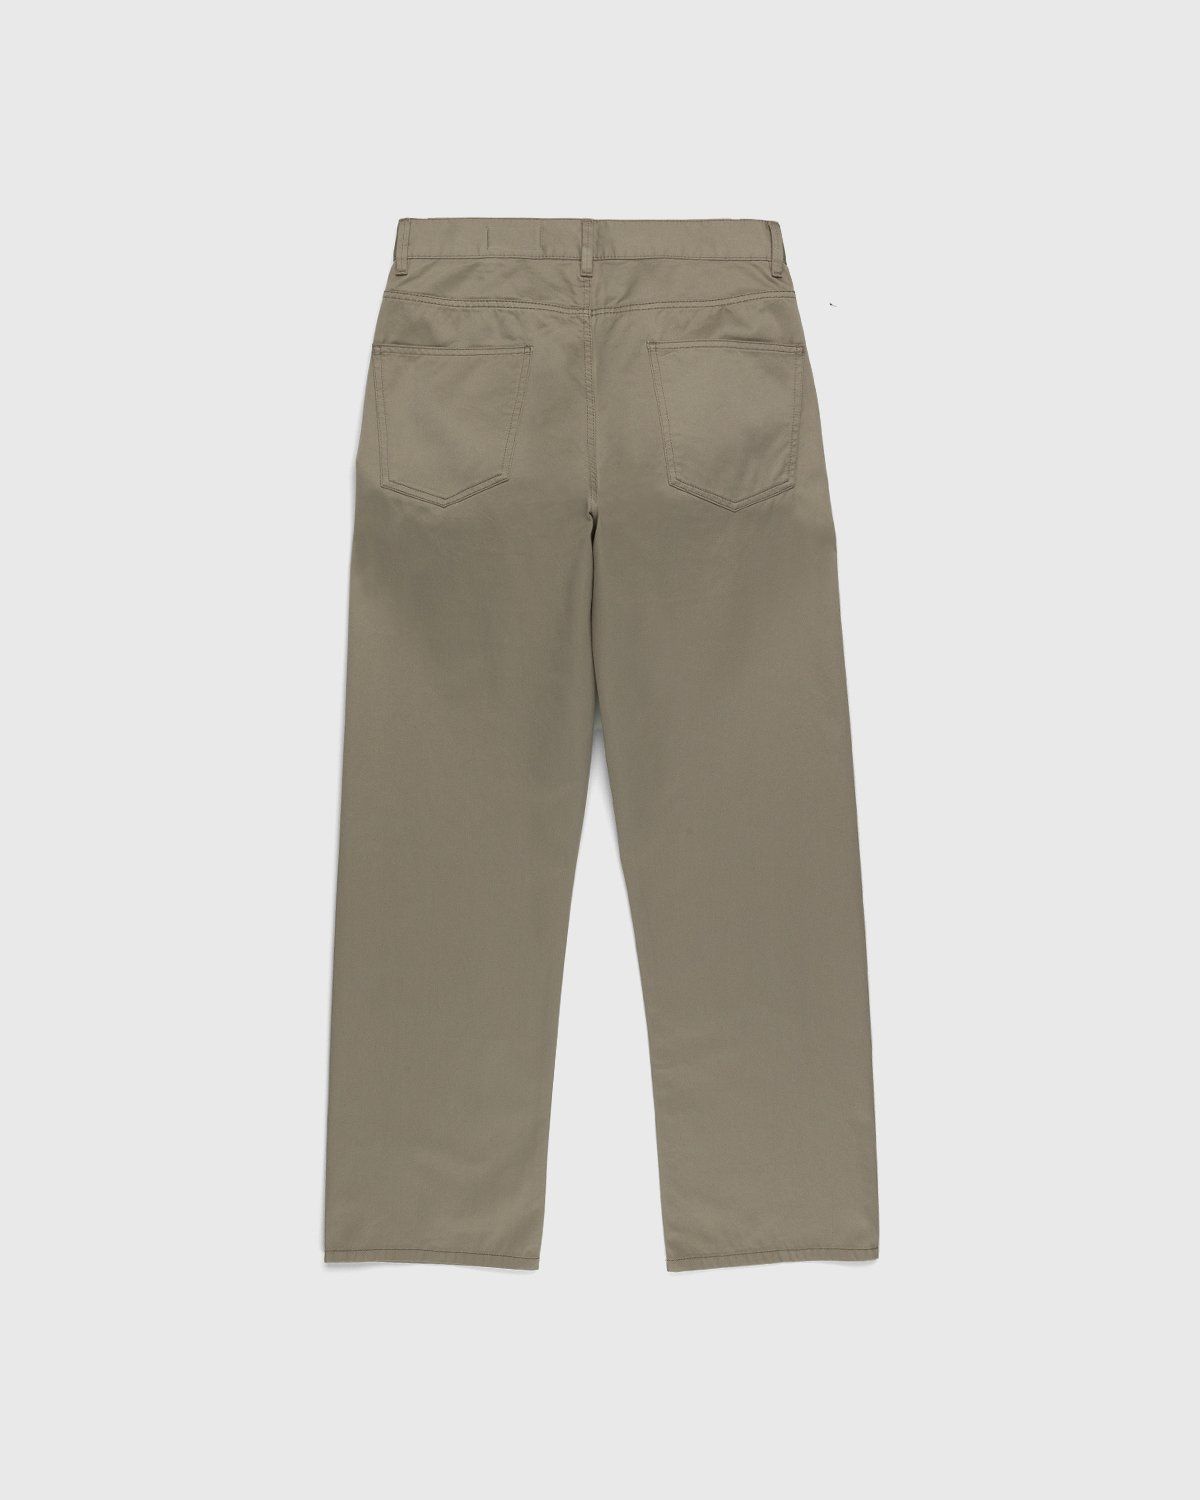 Lemaire – Seamless Pants Light Taupe - Image 2